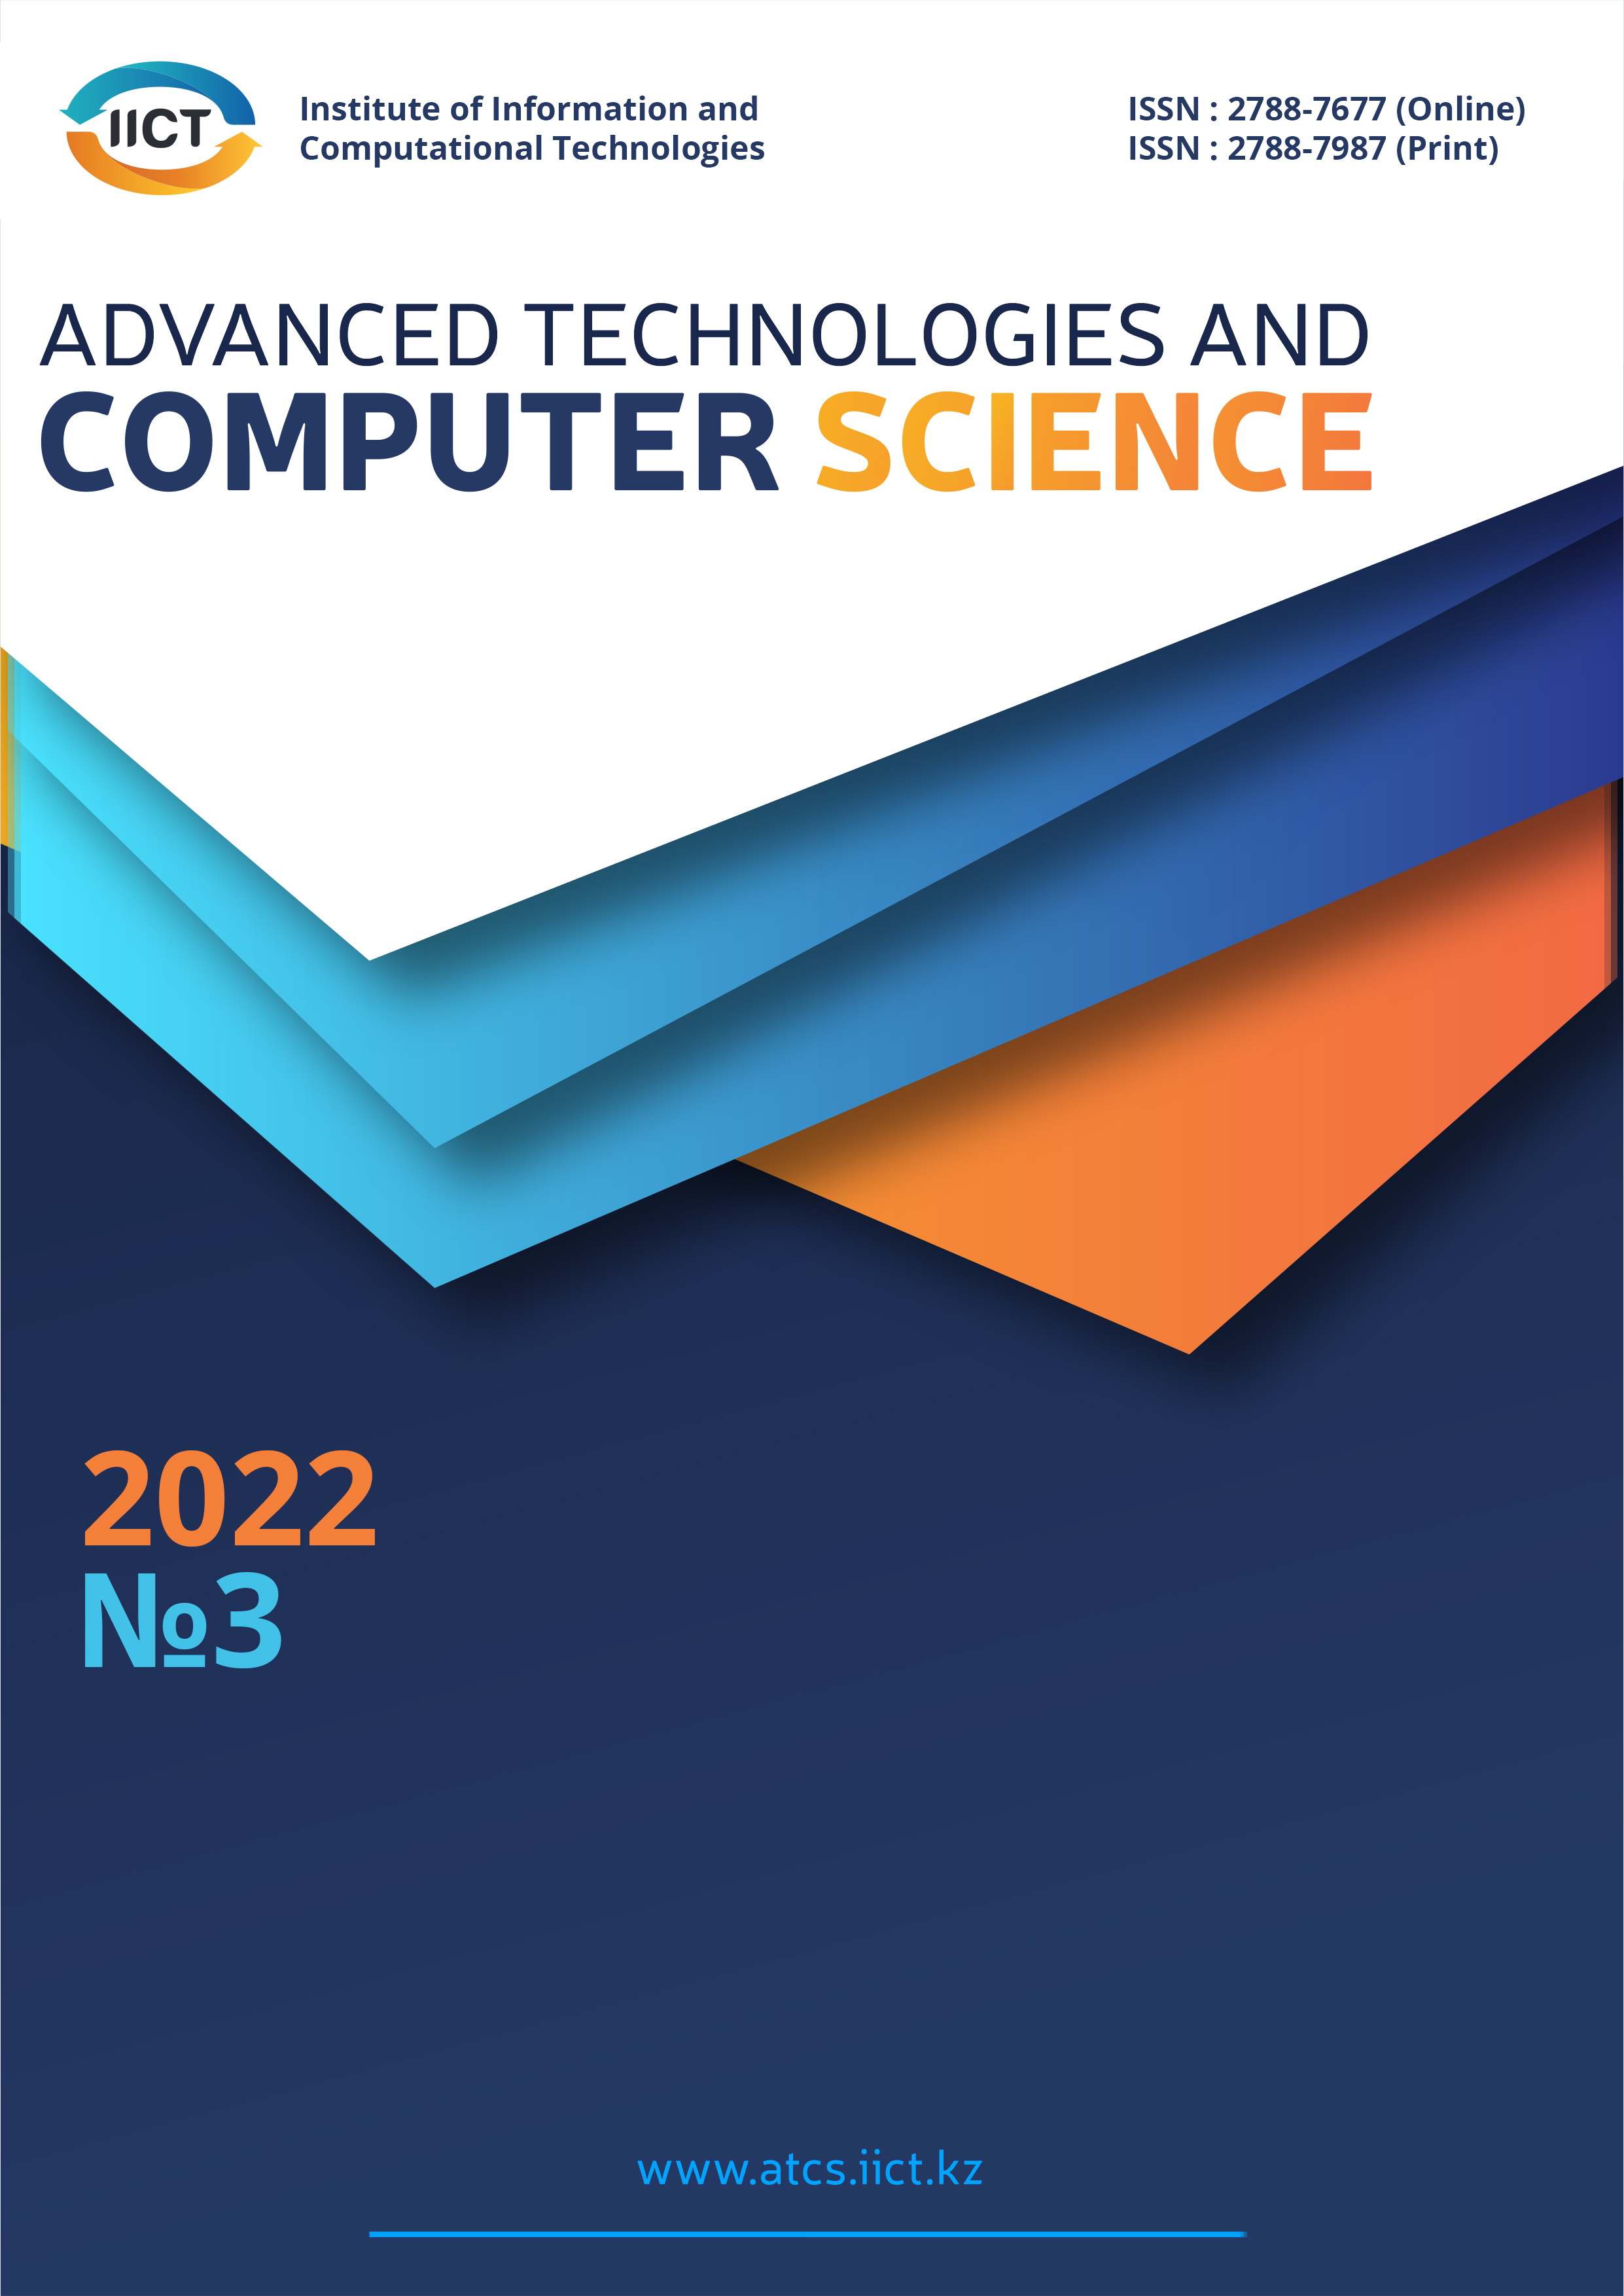 					View No. 3 (2022): Advanced technologies and computer science
				